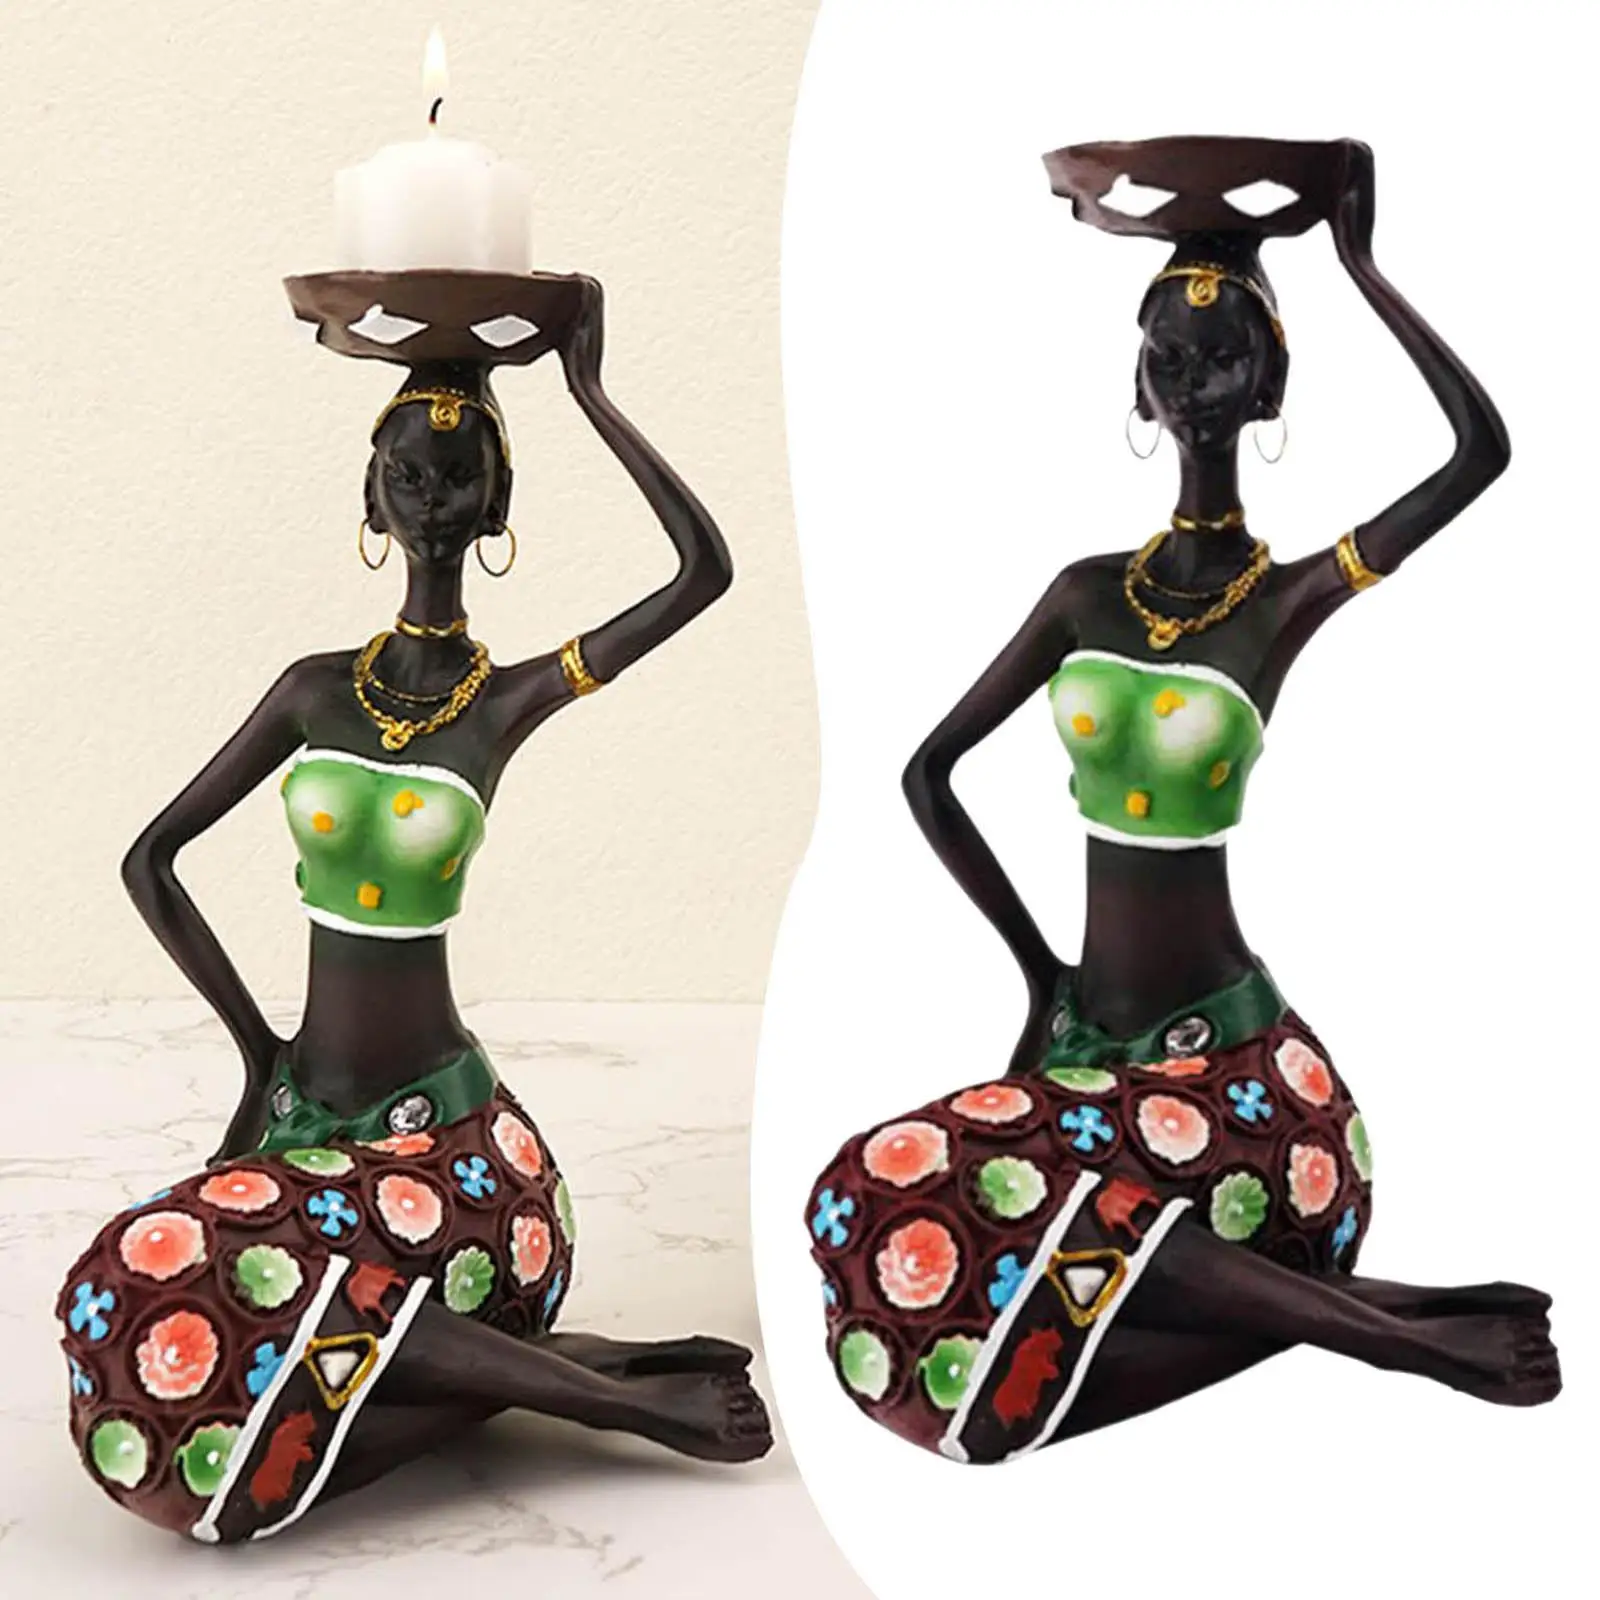 Creative African Women Statues Candlestick Tea Lights Candleholder Tribal Lady Desktop for Home Accents Pillar Candle Bedroom